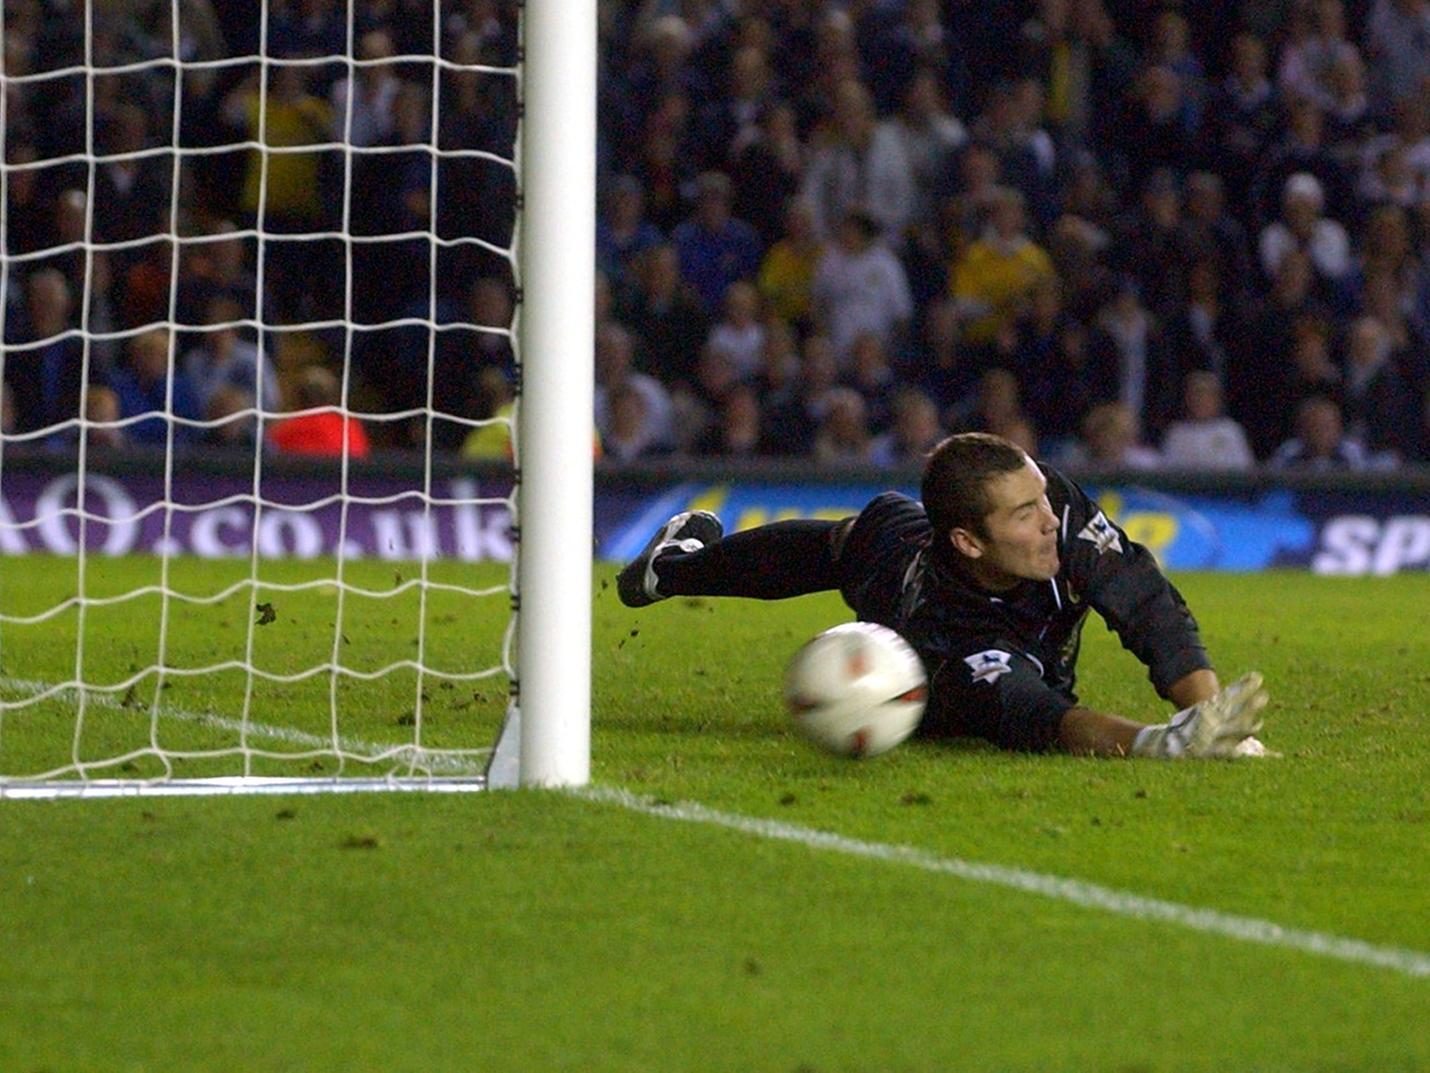 Goalkeeper Paul Robinson proved the hero at both ends of the pitch. Scored a glancing header deep into stoppage time before saving Andy Gurney's effort in the penaty shoot out to send Leeds through in the Carling Cup.